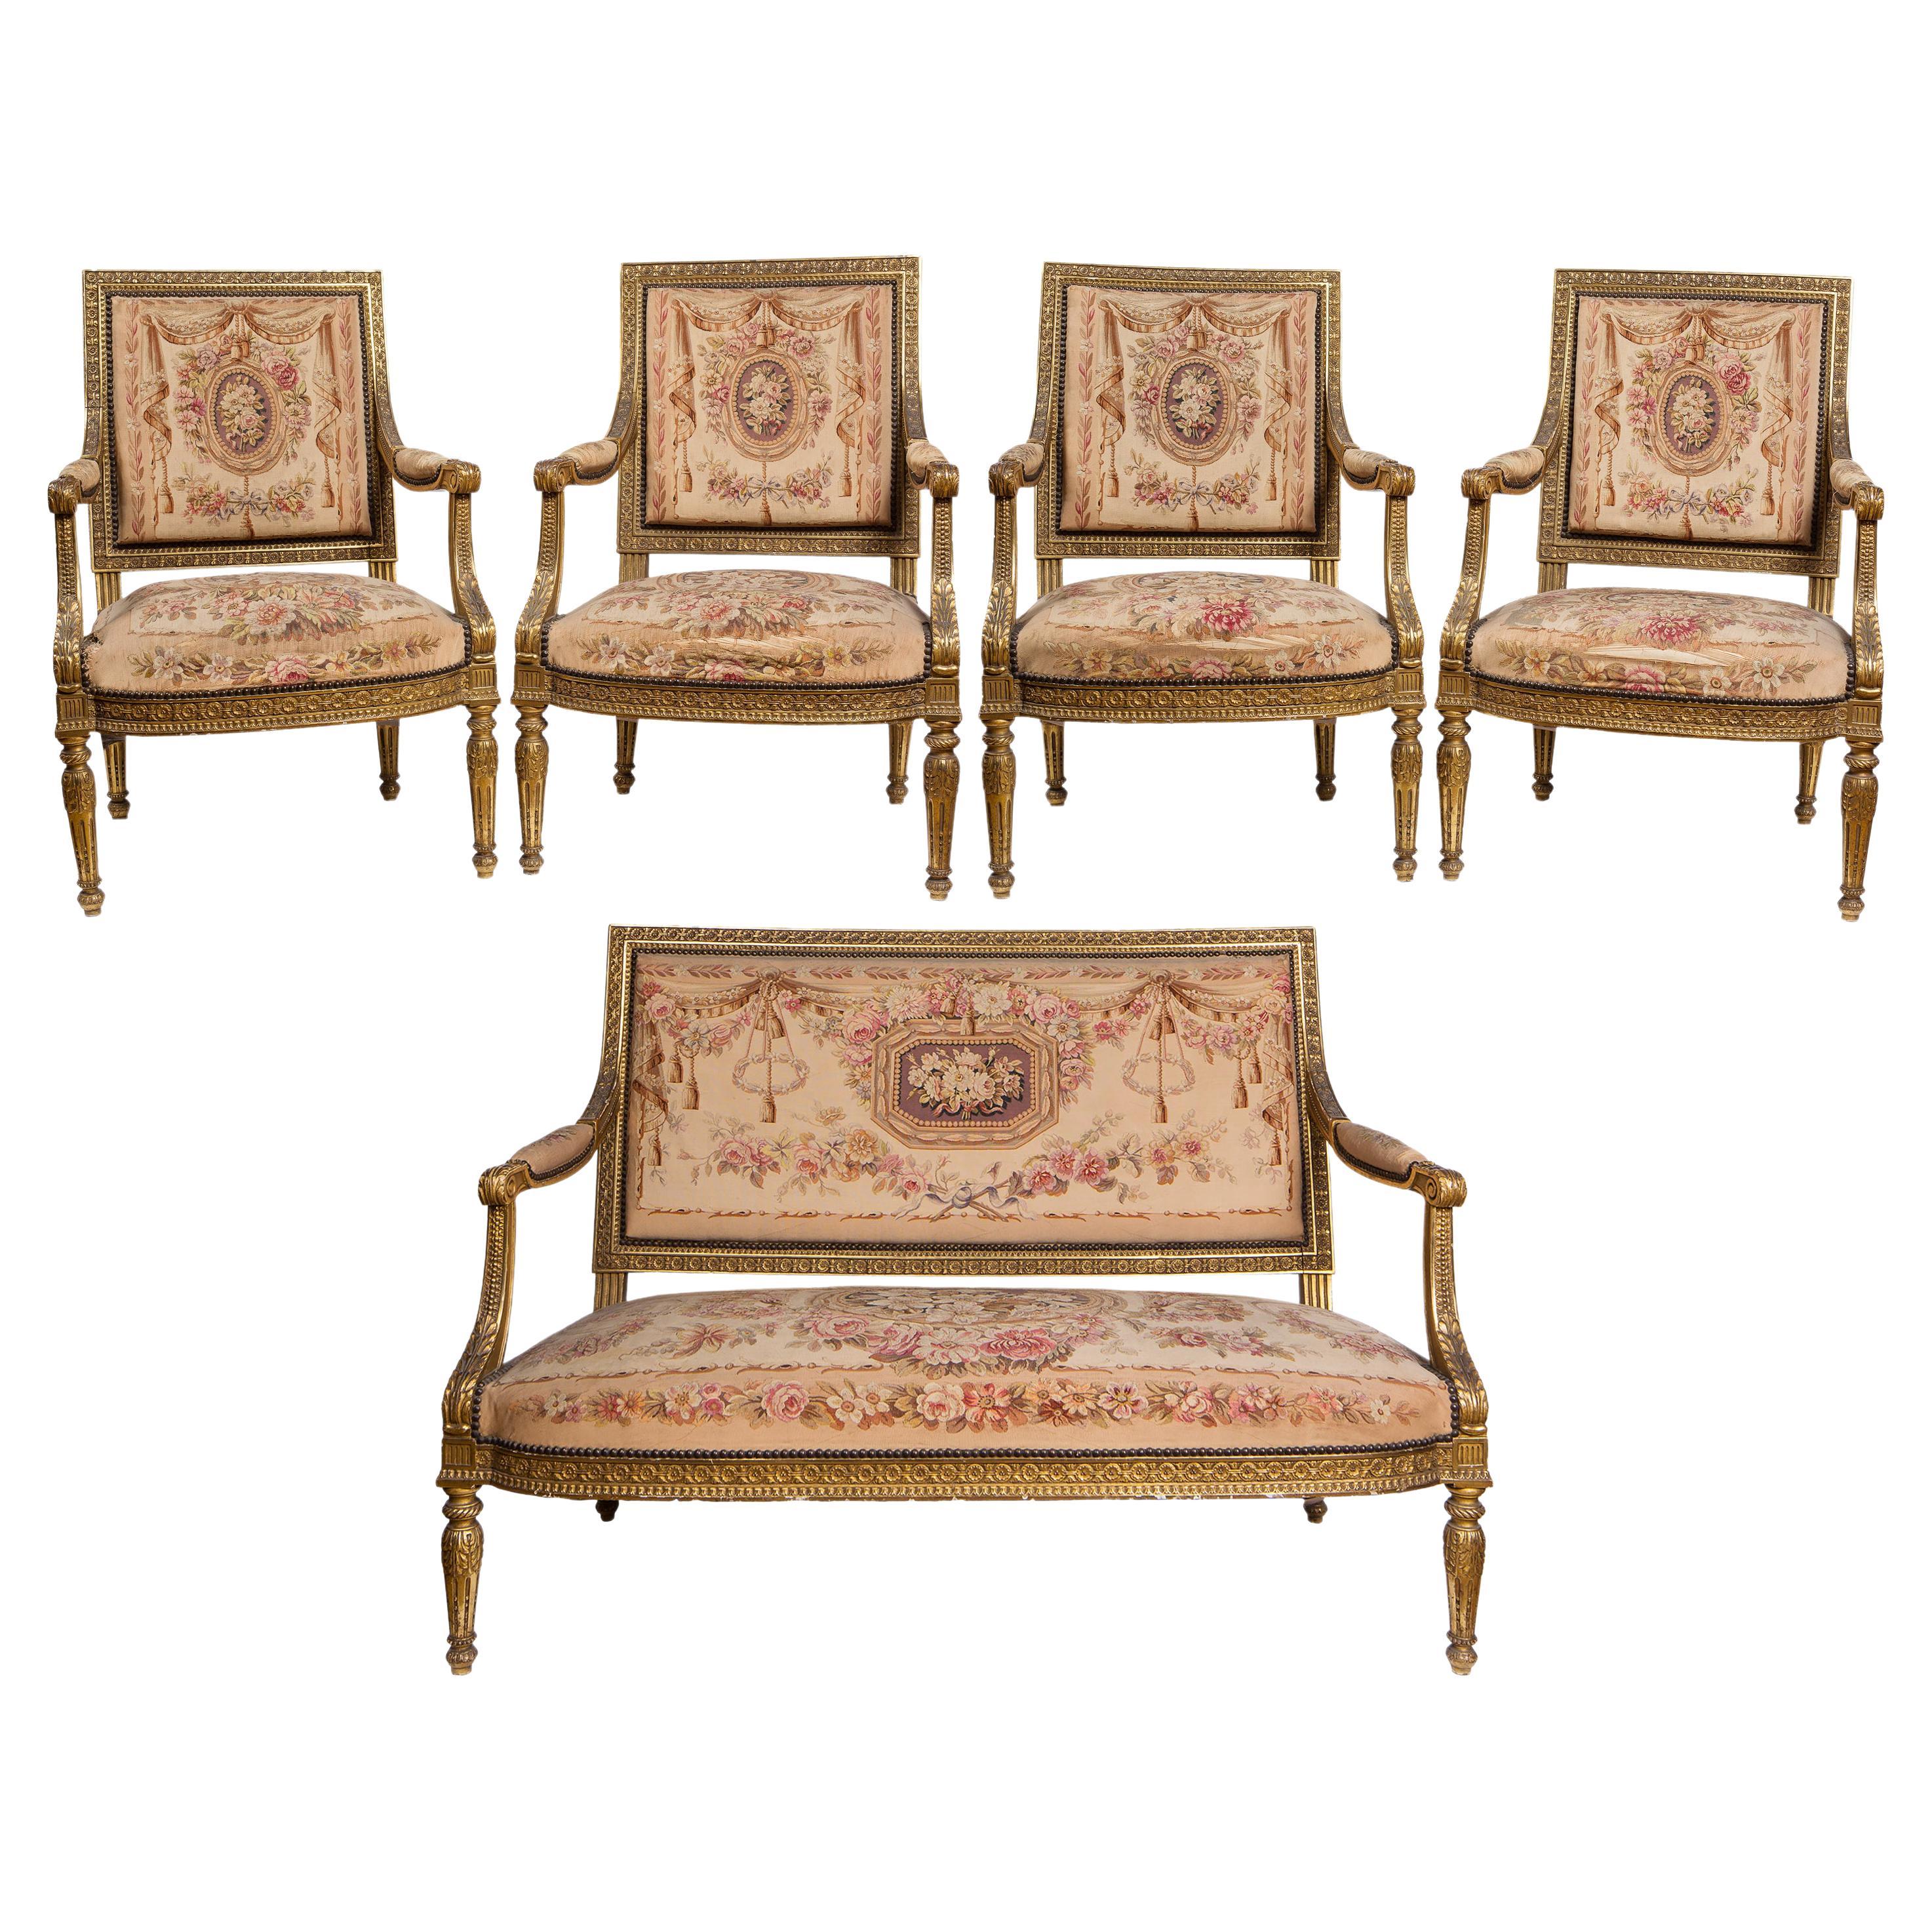 Antique Louis XVI Style Sofa, 4 Chair Salon Suite, Aubusson Tapestry Upholstery For Sale